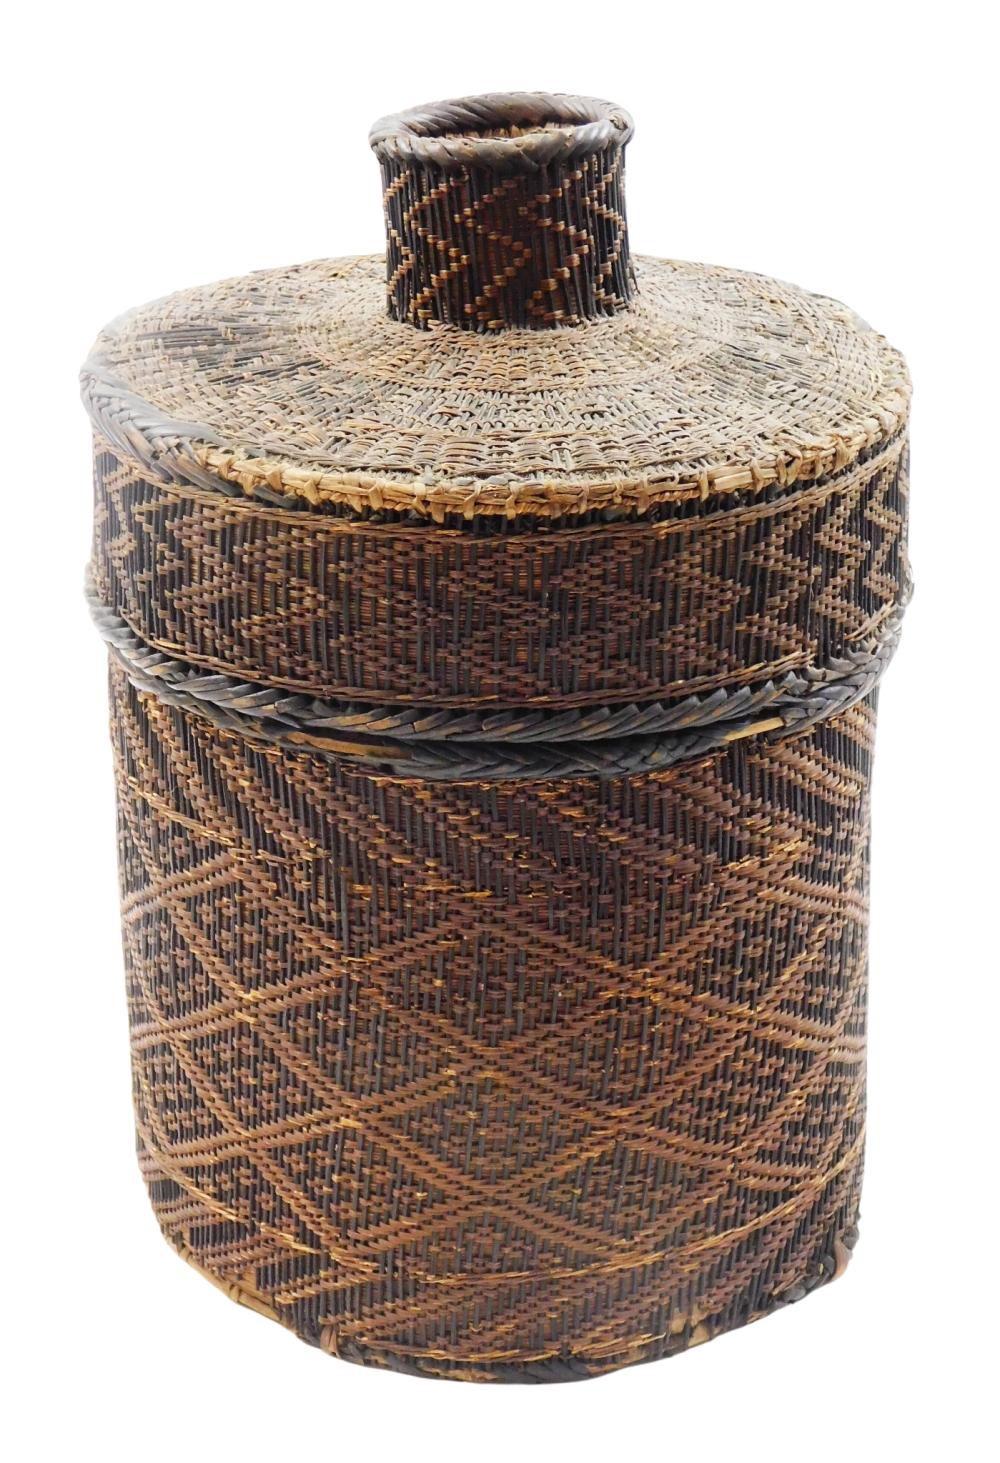 UNUSUAL CYLINDRICAL BASKET IN BROWN 309266